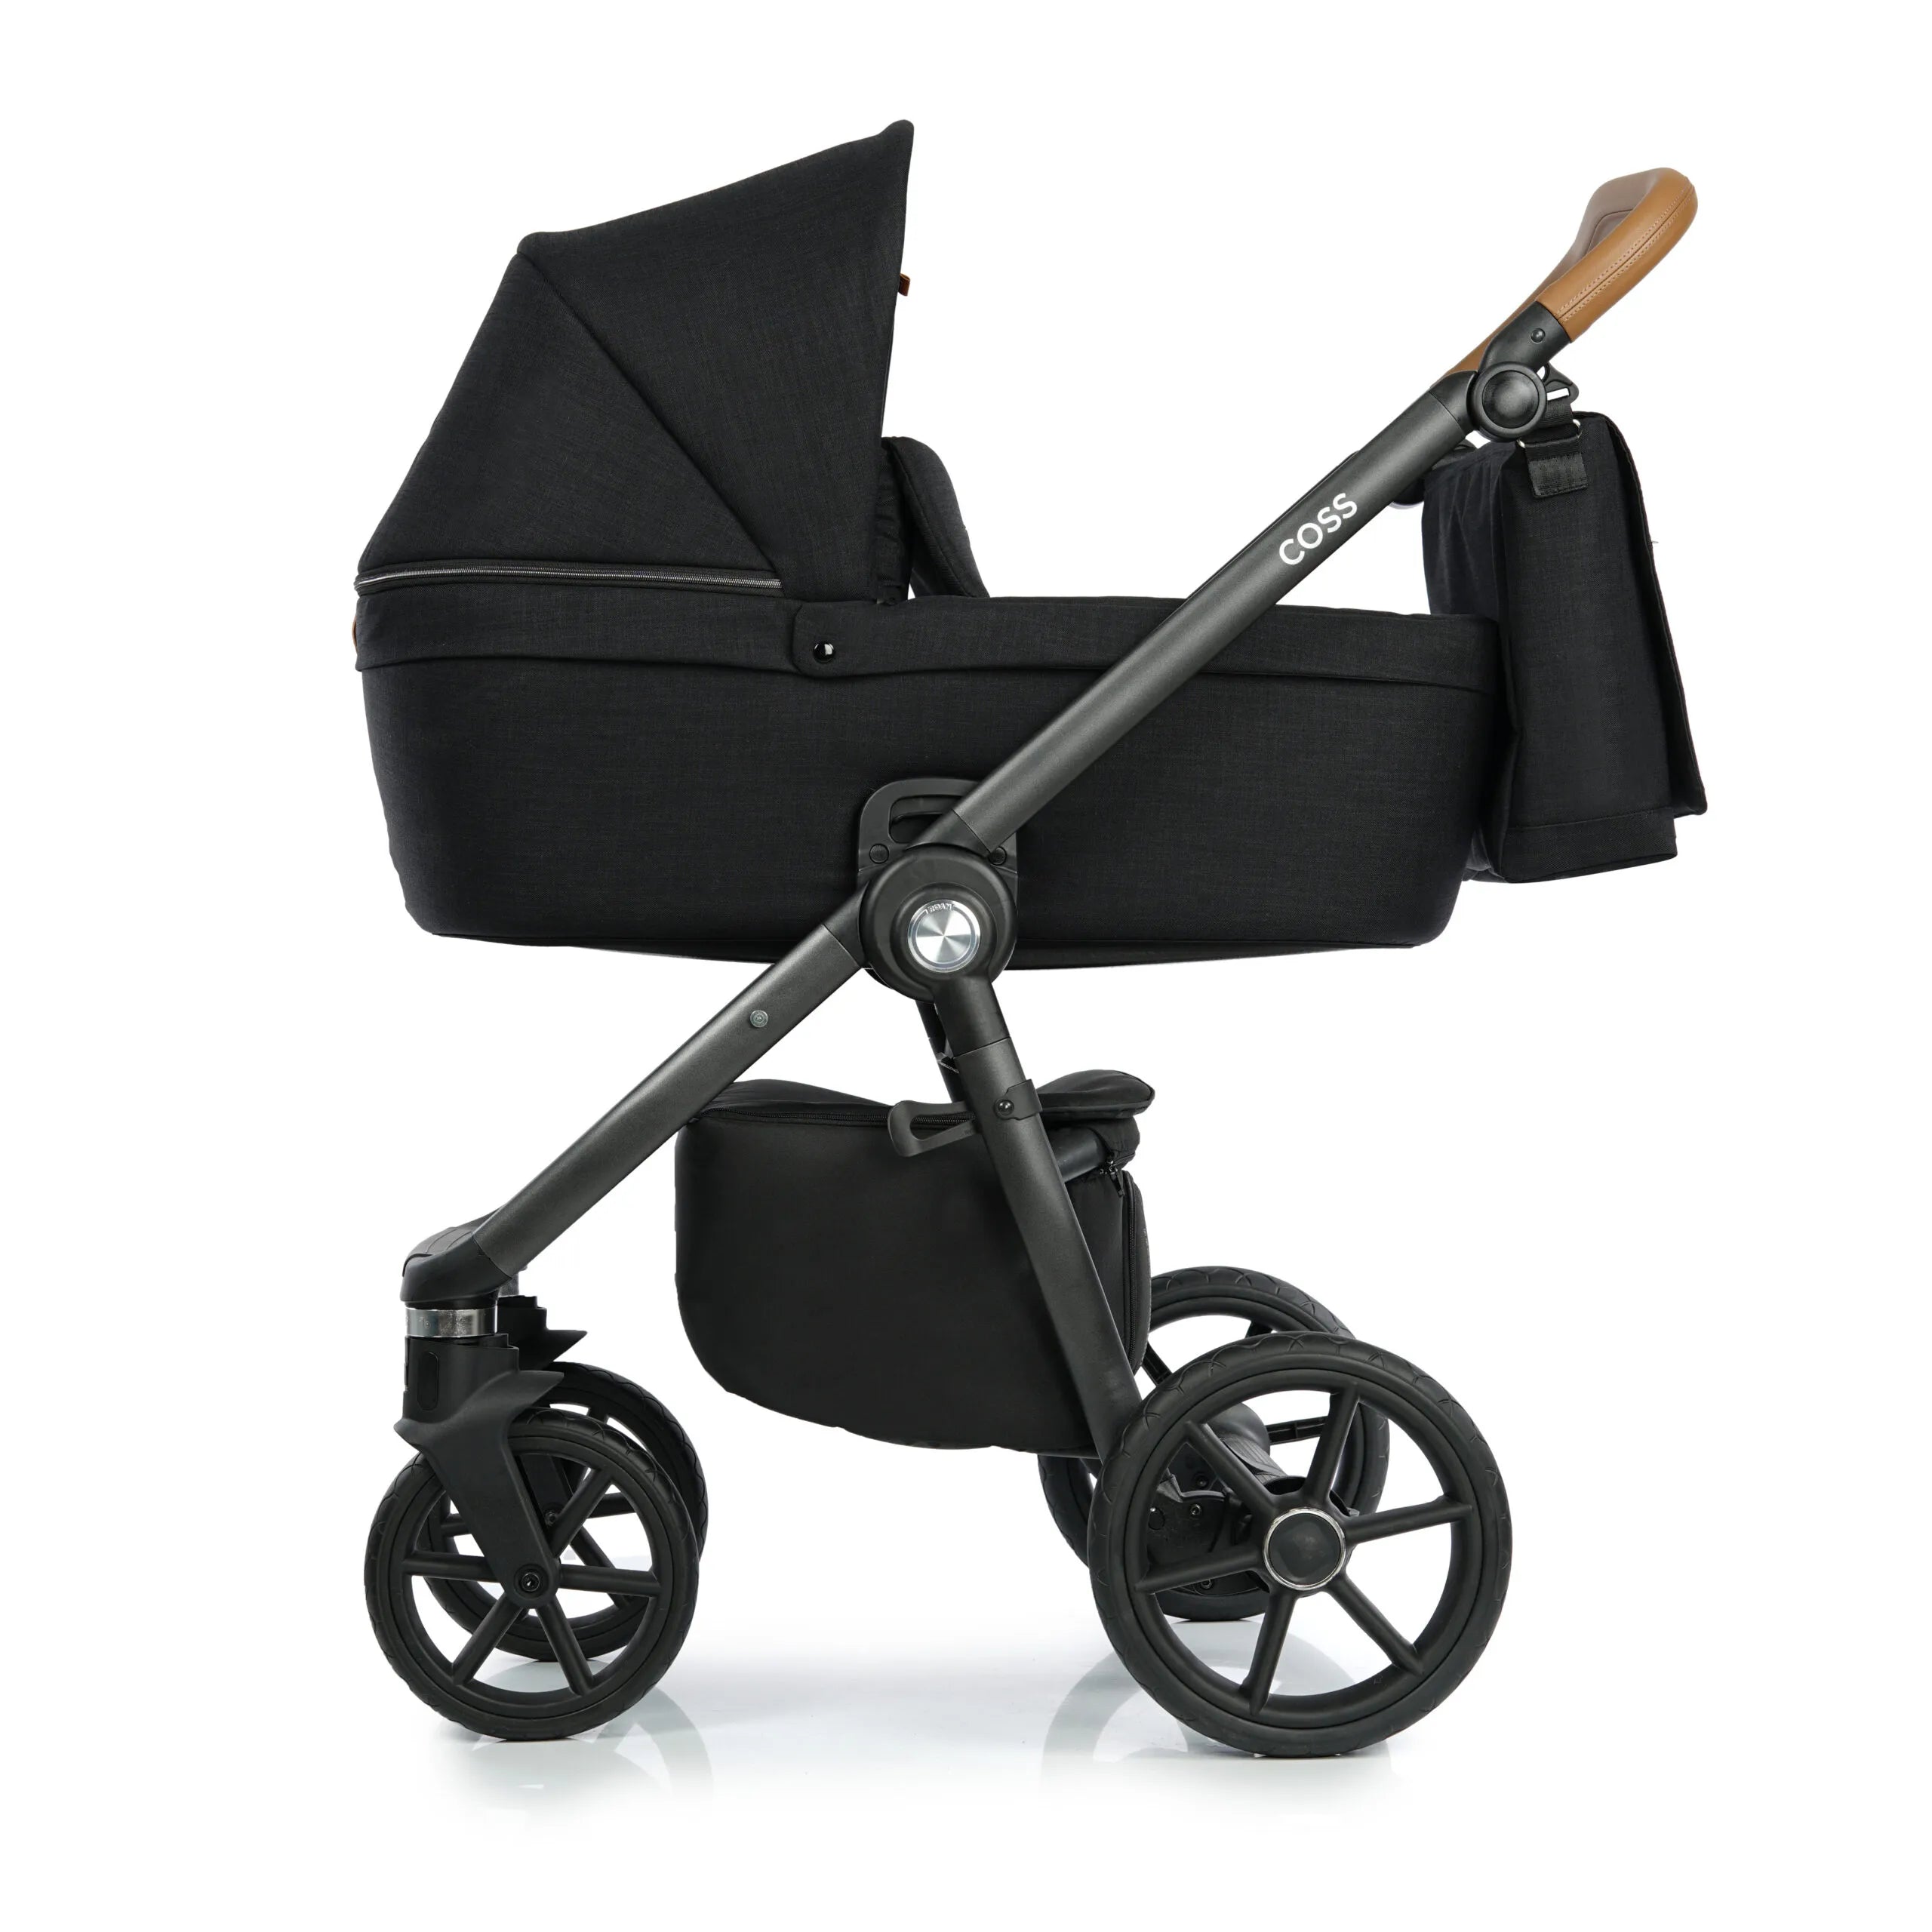 Roan COSS baby stroller carry cot and stroller, color Night Trip